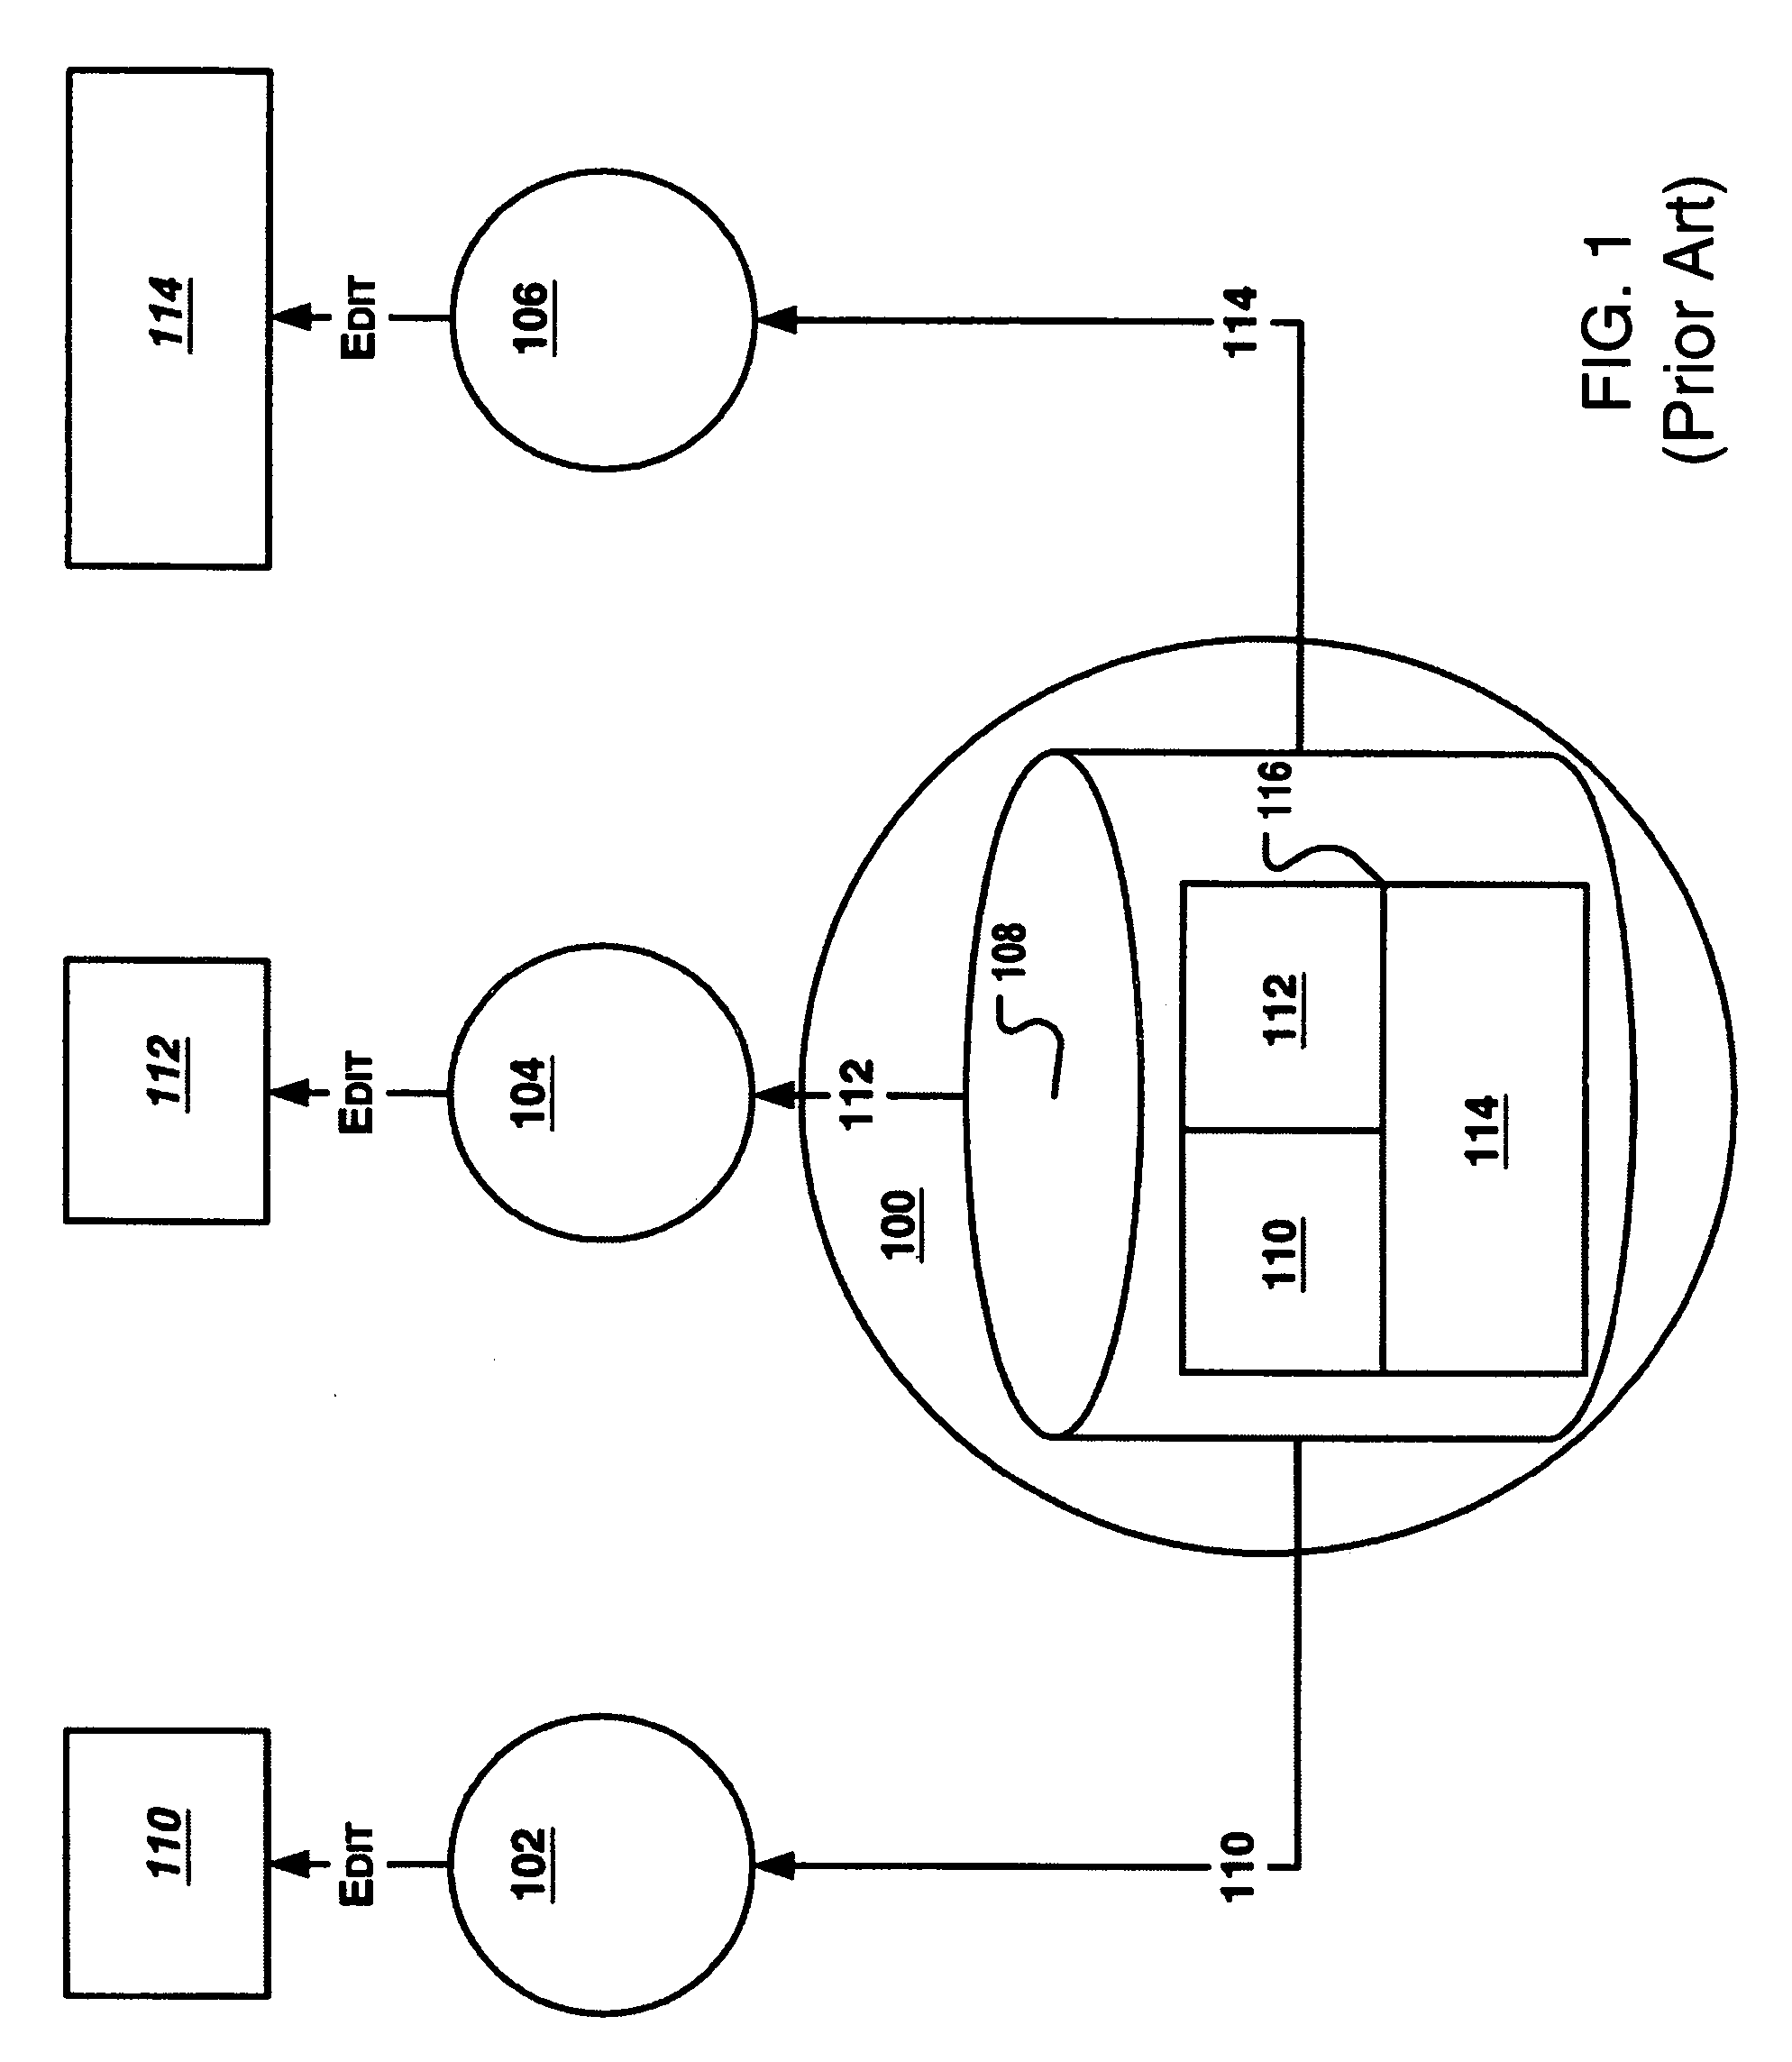 Protection boundaries in a parallel printed circuit board design environment